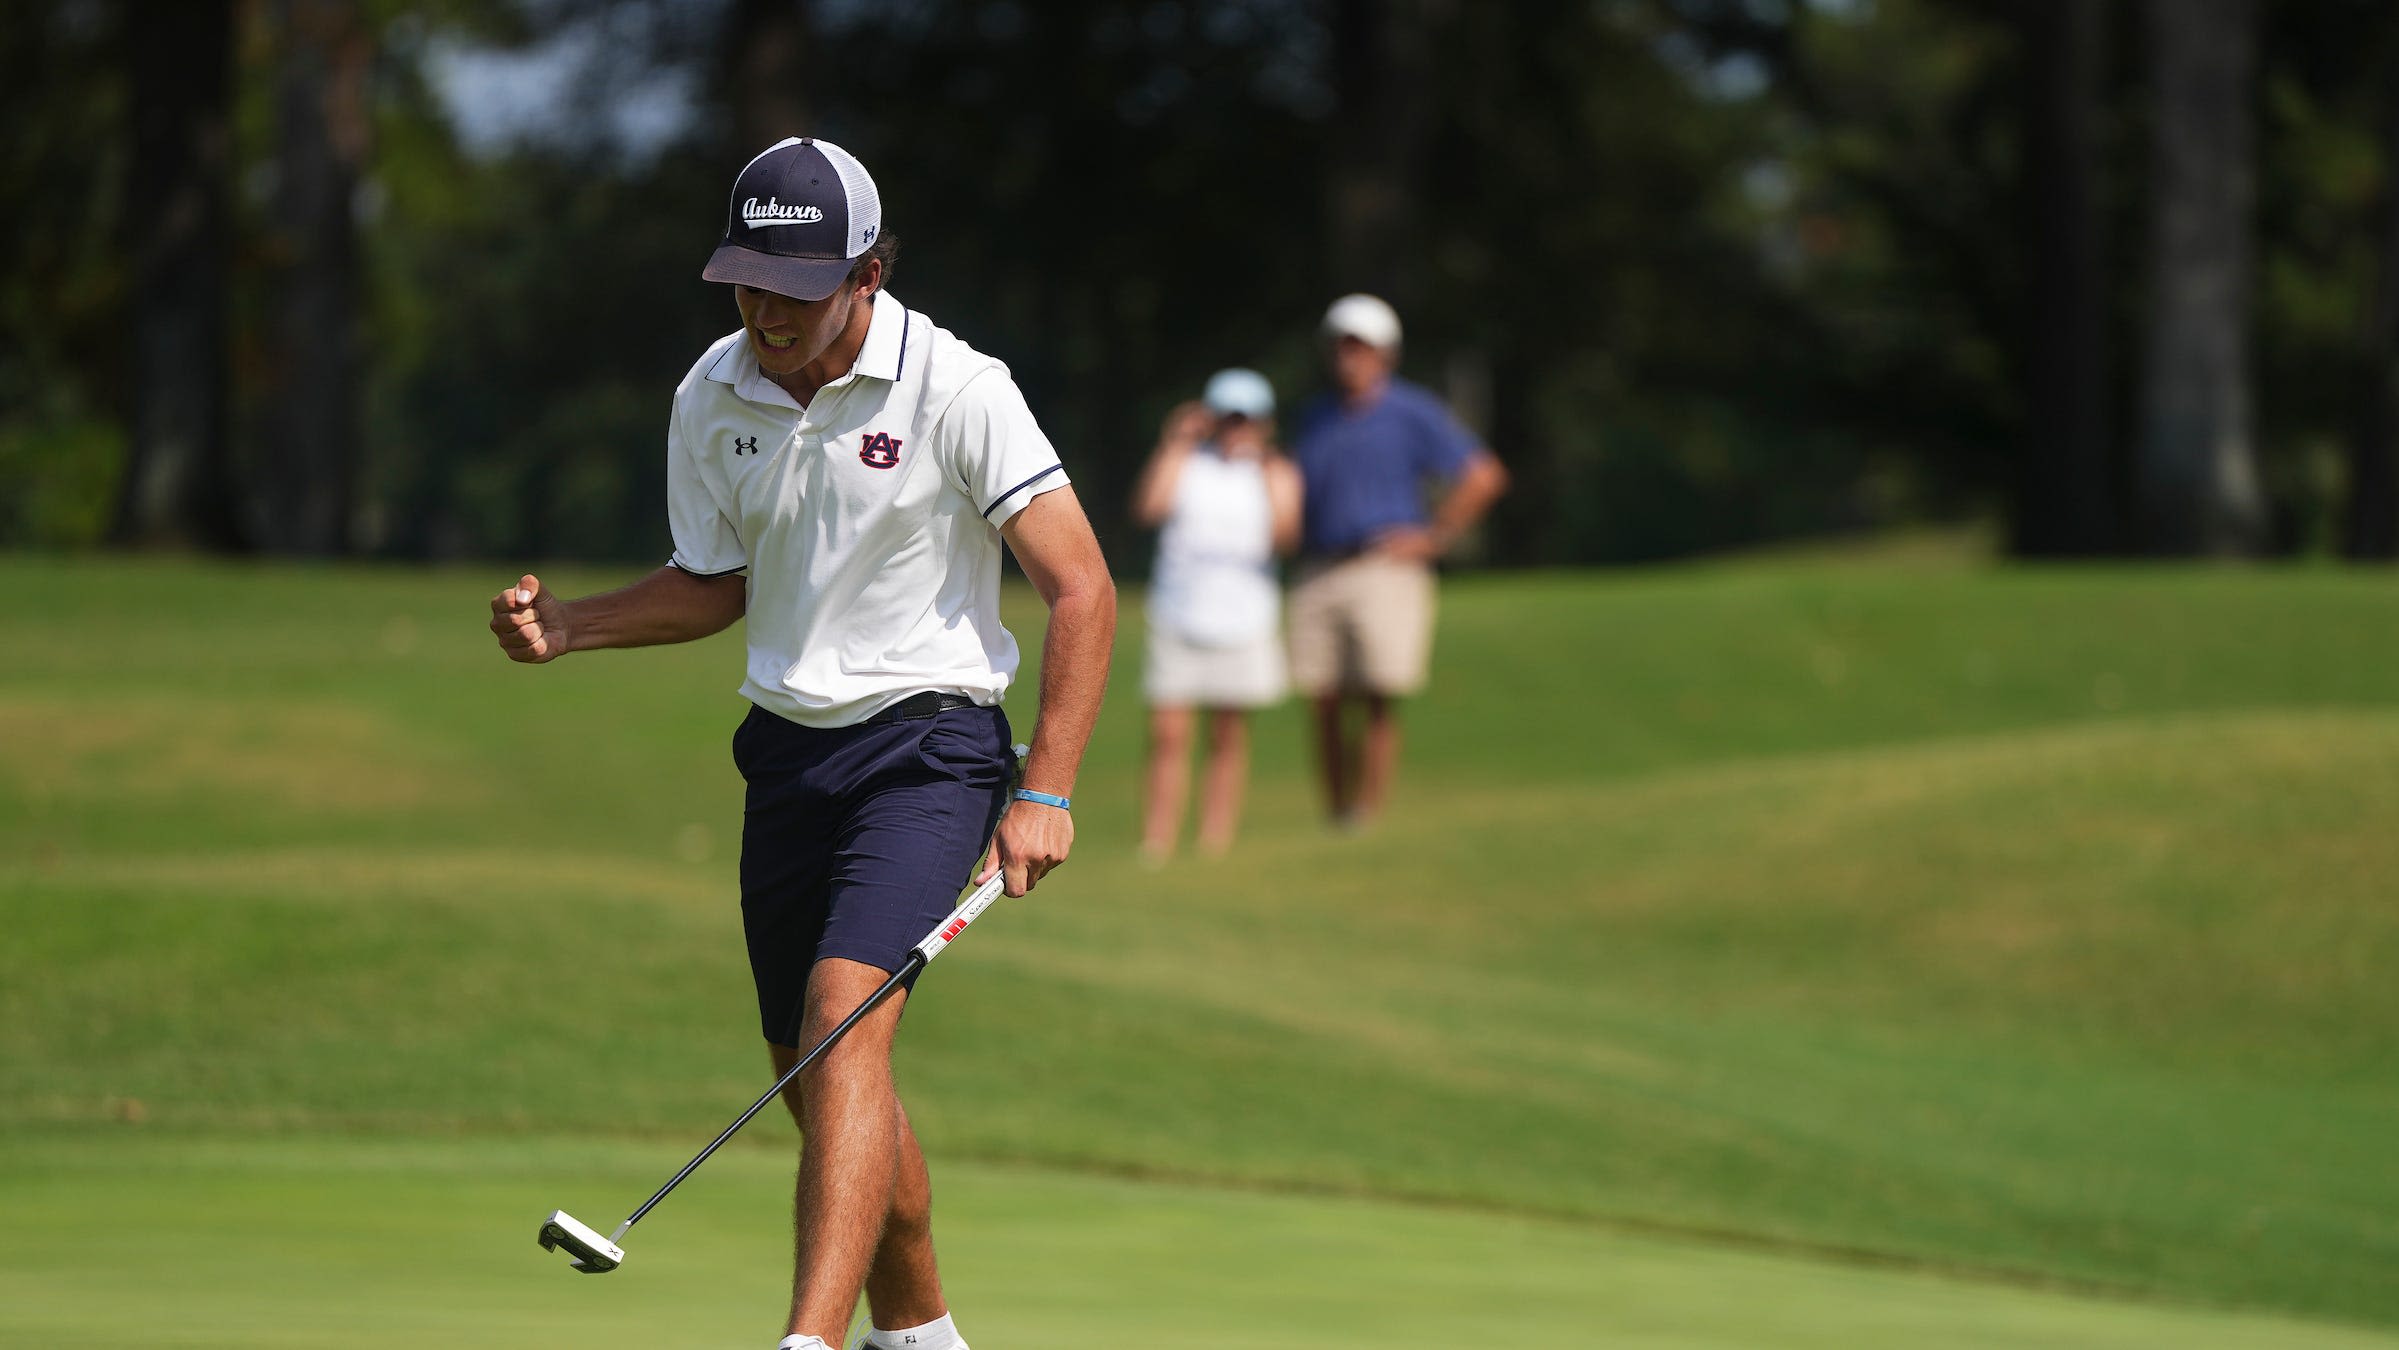 No. 1 Auburn golf beats No. 6 Florida State to win first national title in program history